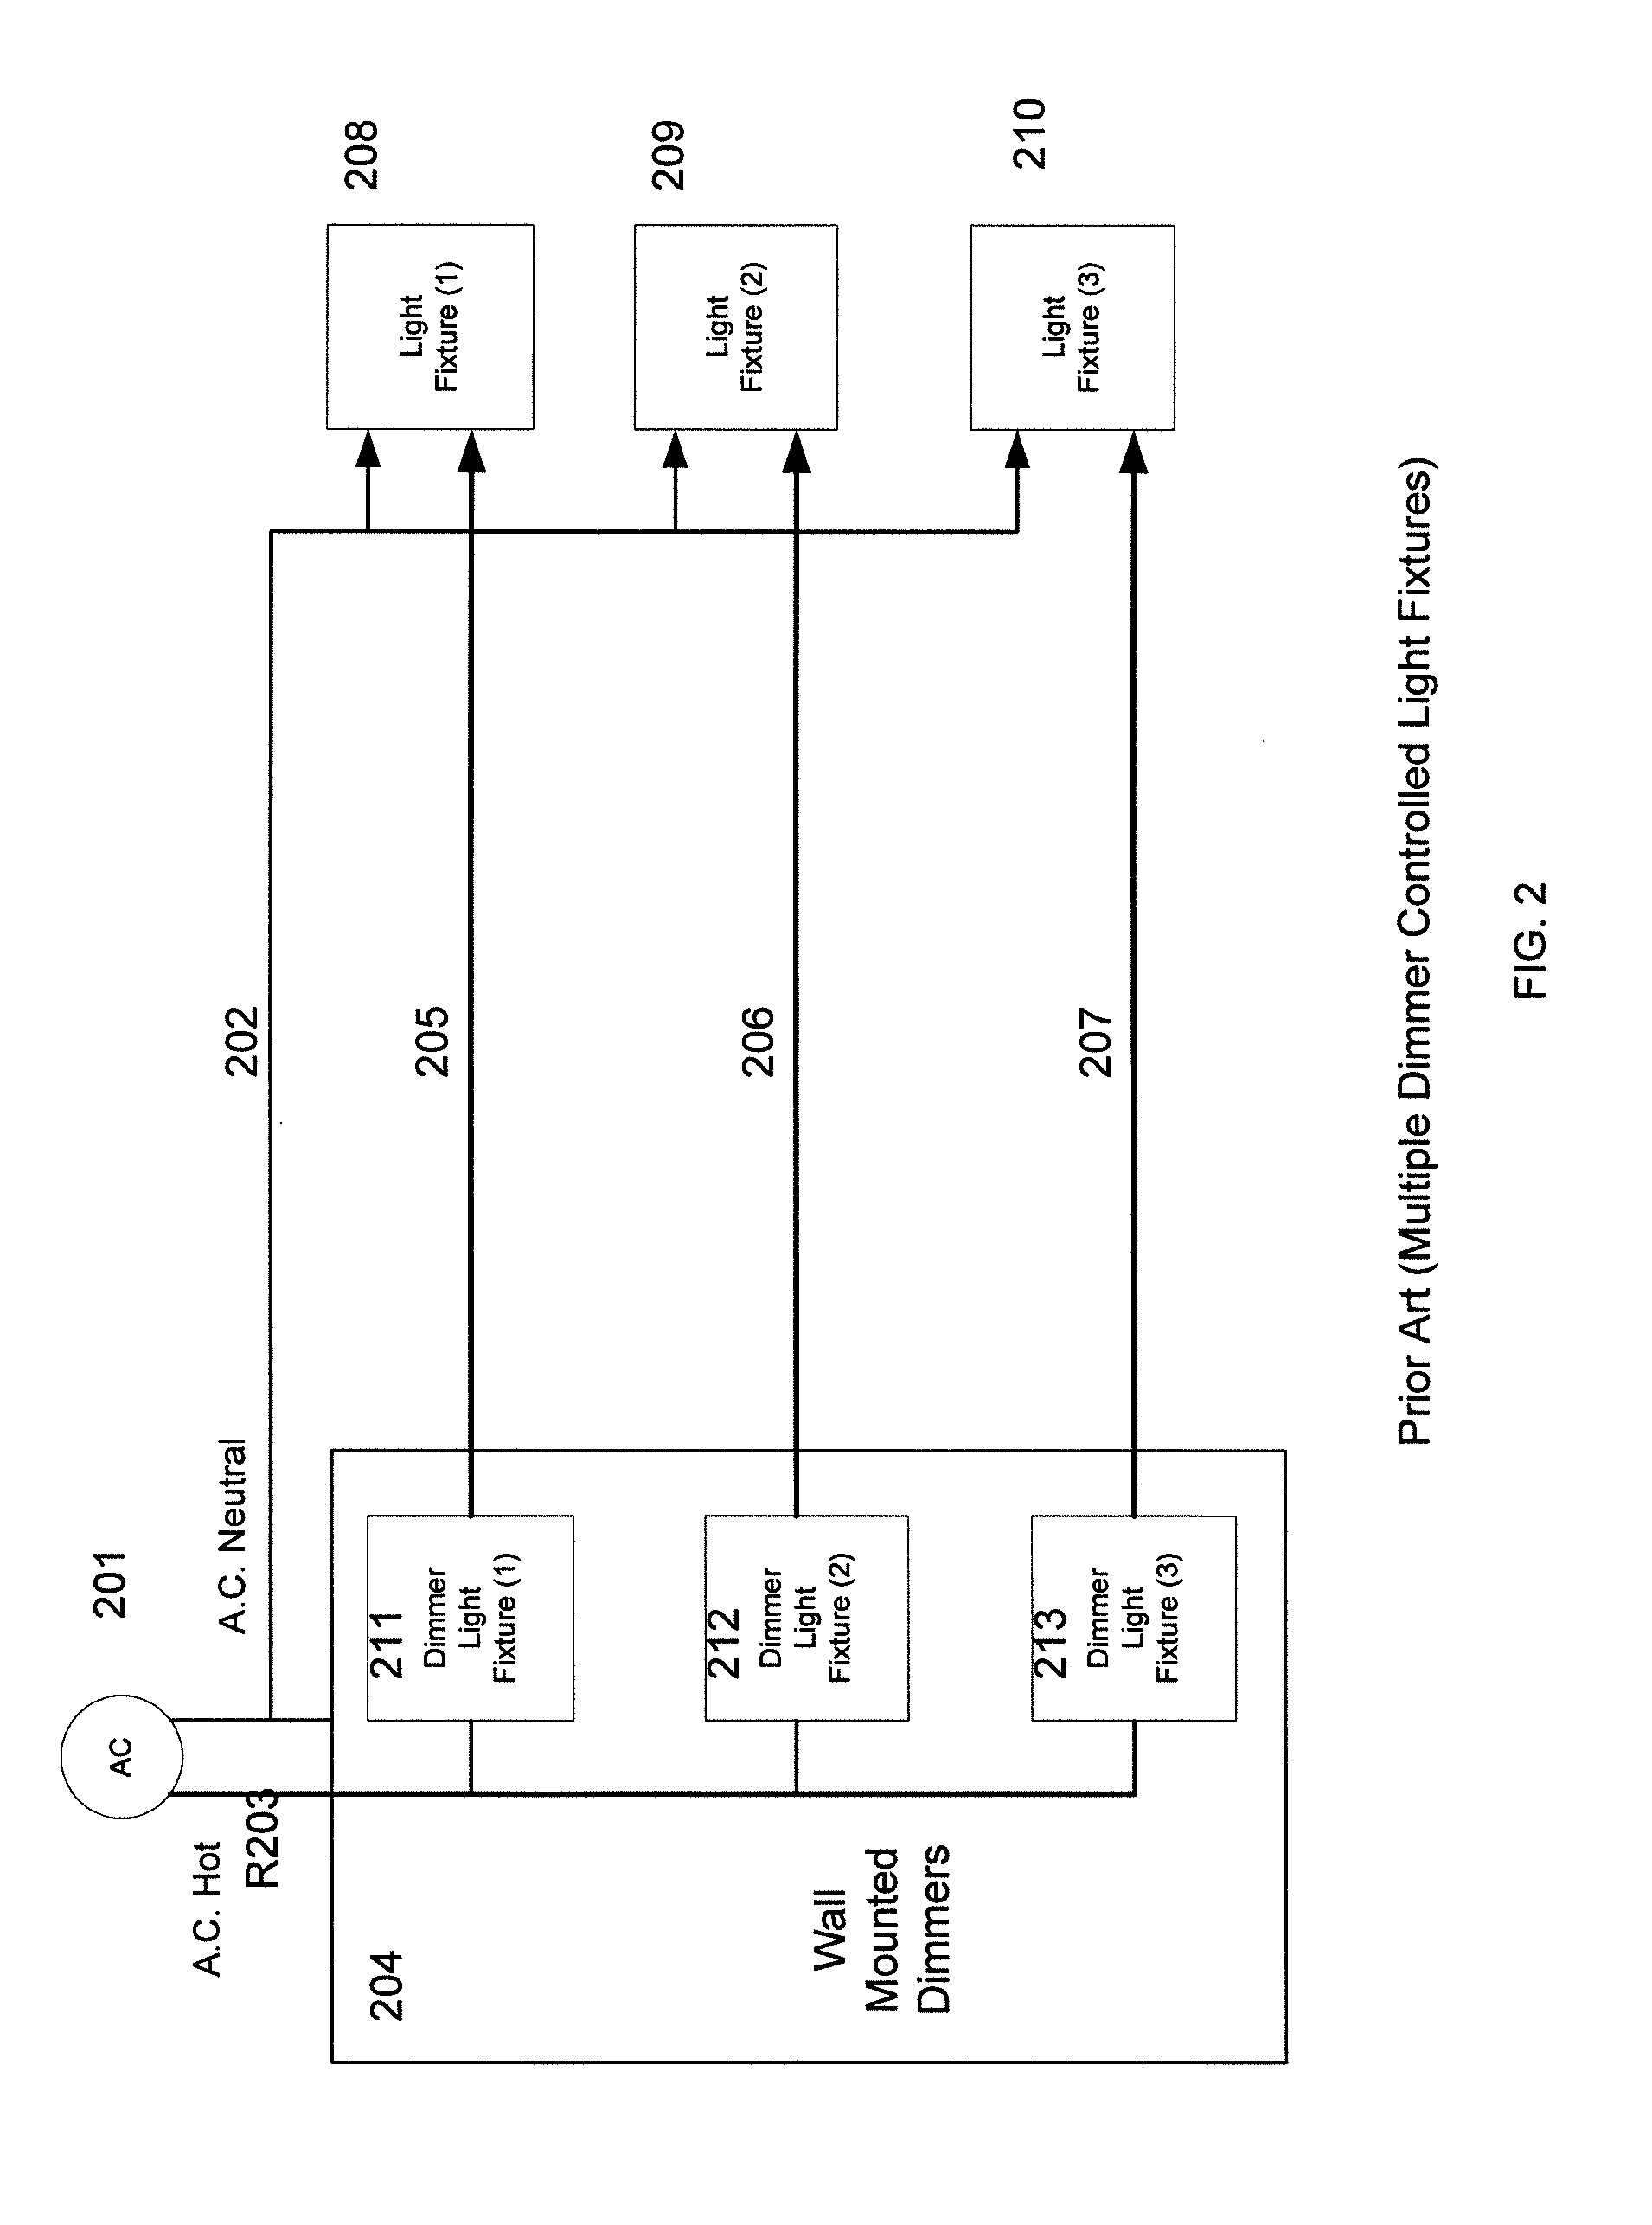 Combined lighting device with an integrated dimming control system